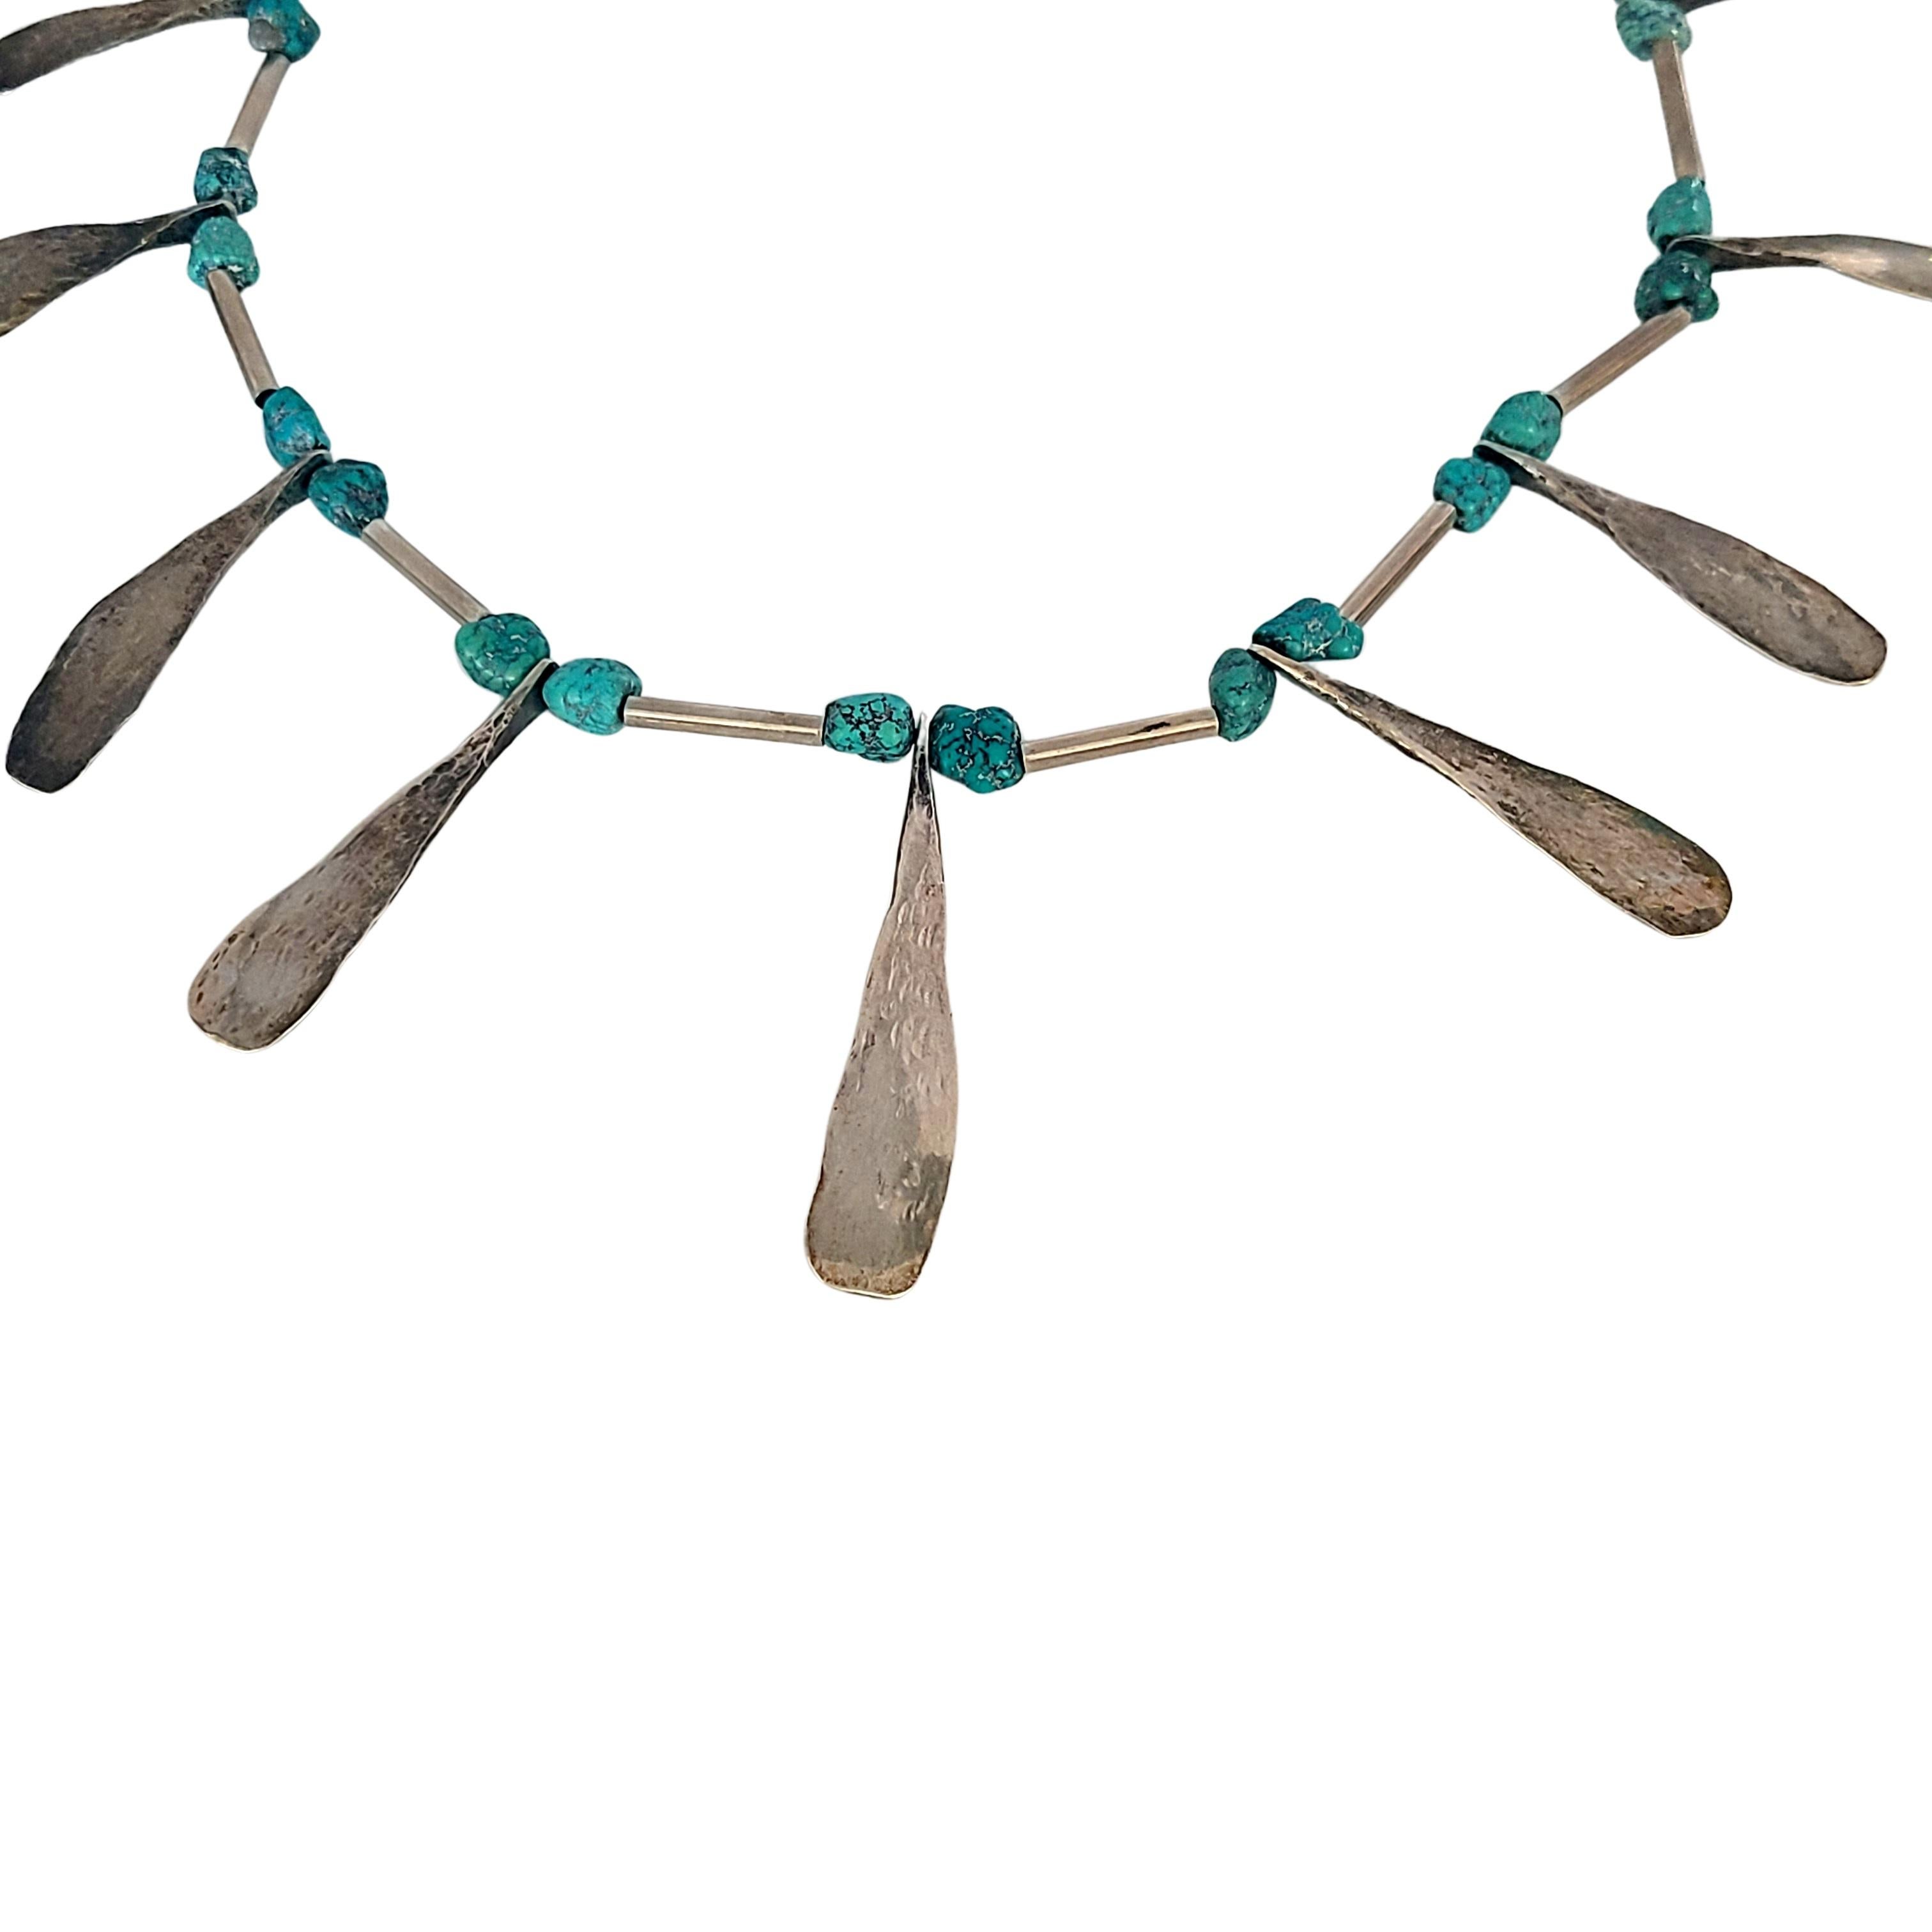 Silver and turquoise bead necklace.

This necklace features long silver barrel beads with turquoise beads and hammered silver teardrop dangles.

Measures approx 26 1/2